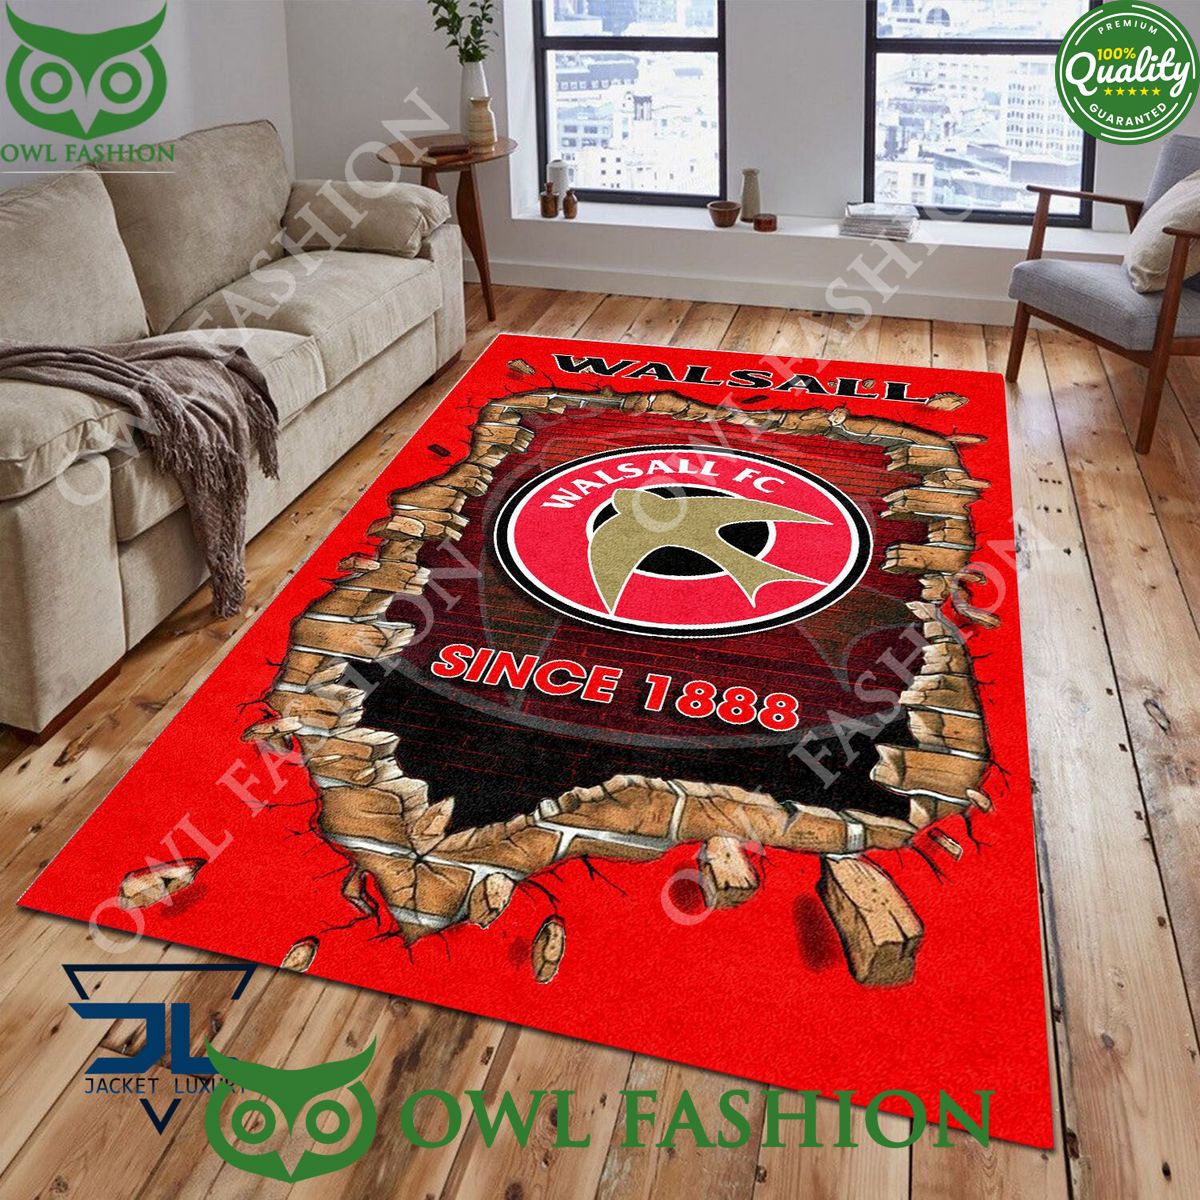 Walsall FC 1864 League Two Living Room Rug Carpet Coolosm